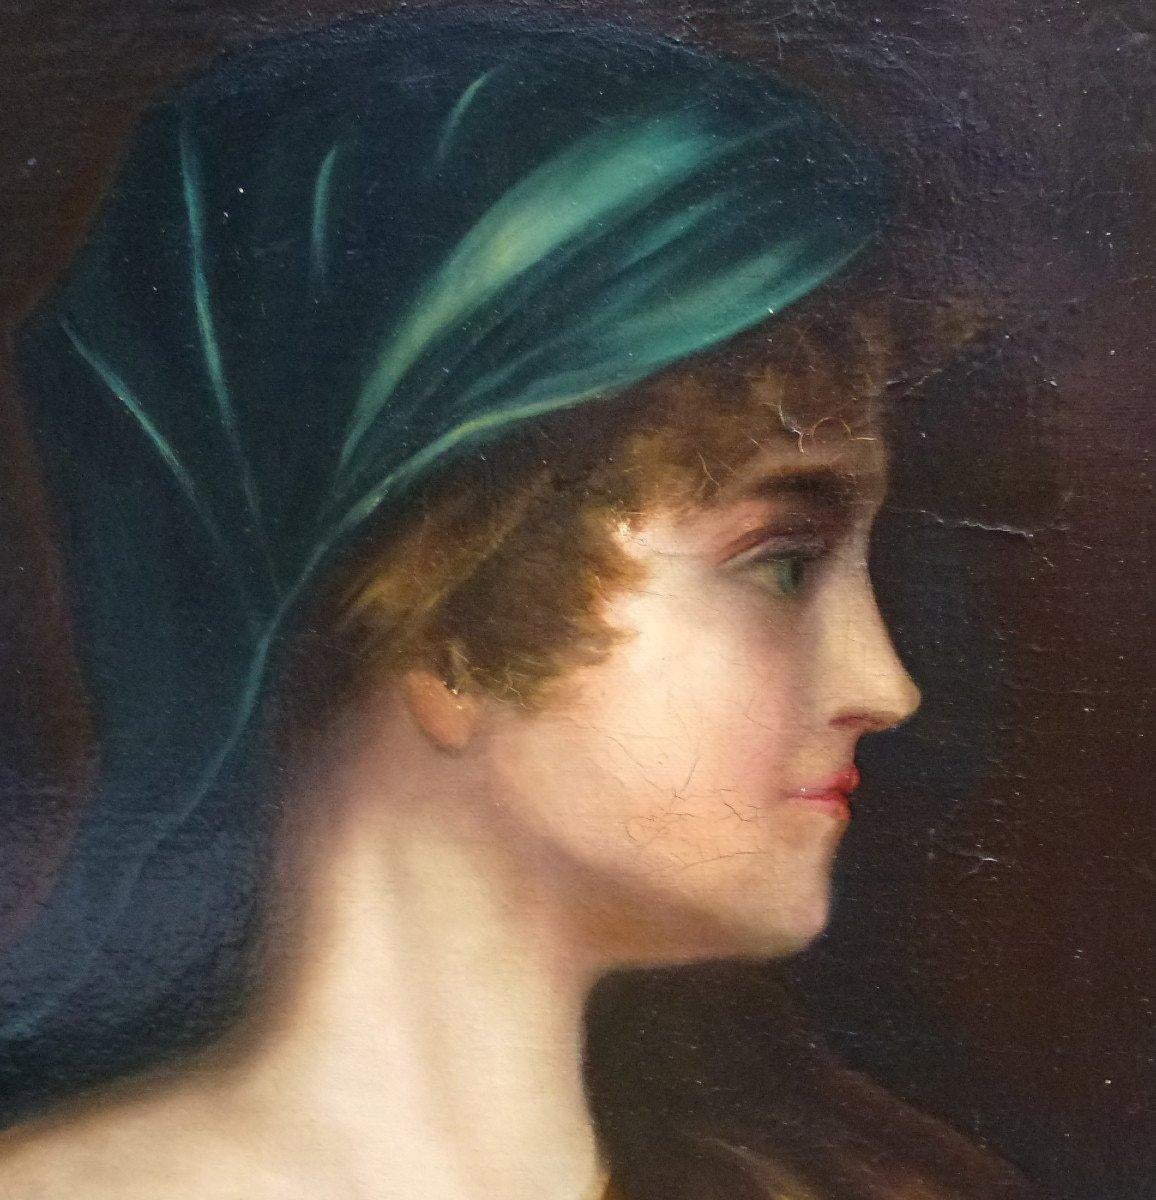 This late 19th-century oil on canvas exudes a sense of refined grace, characteristic of the art from this period. The portrayed woman, captured in profile, is a study in gentle luminosity against a deep, somber background. Her turquoise headscarf,